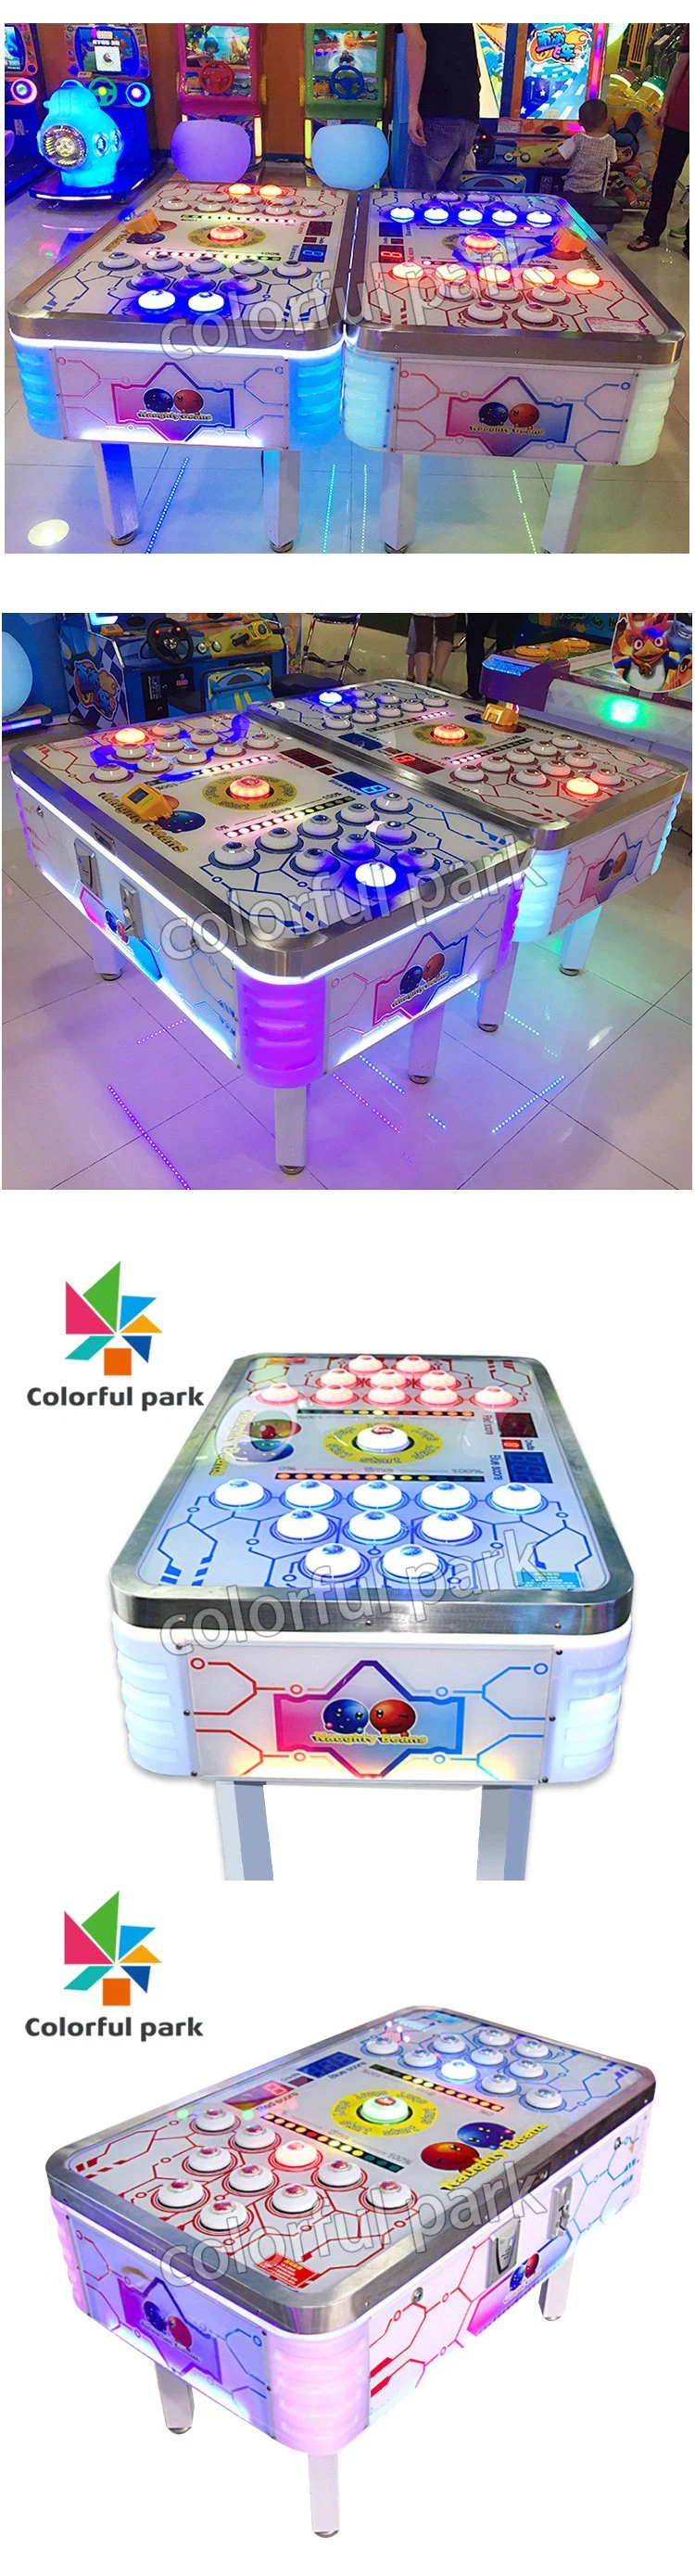 Colorful Park Kids Hitting Beans Coin Operated Arcade Hammer Game Machine Redemption Amusement Games